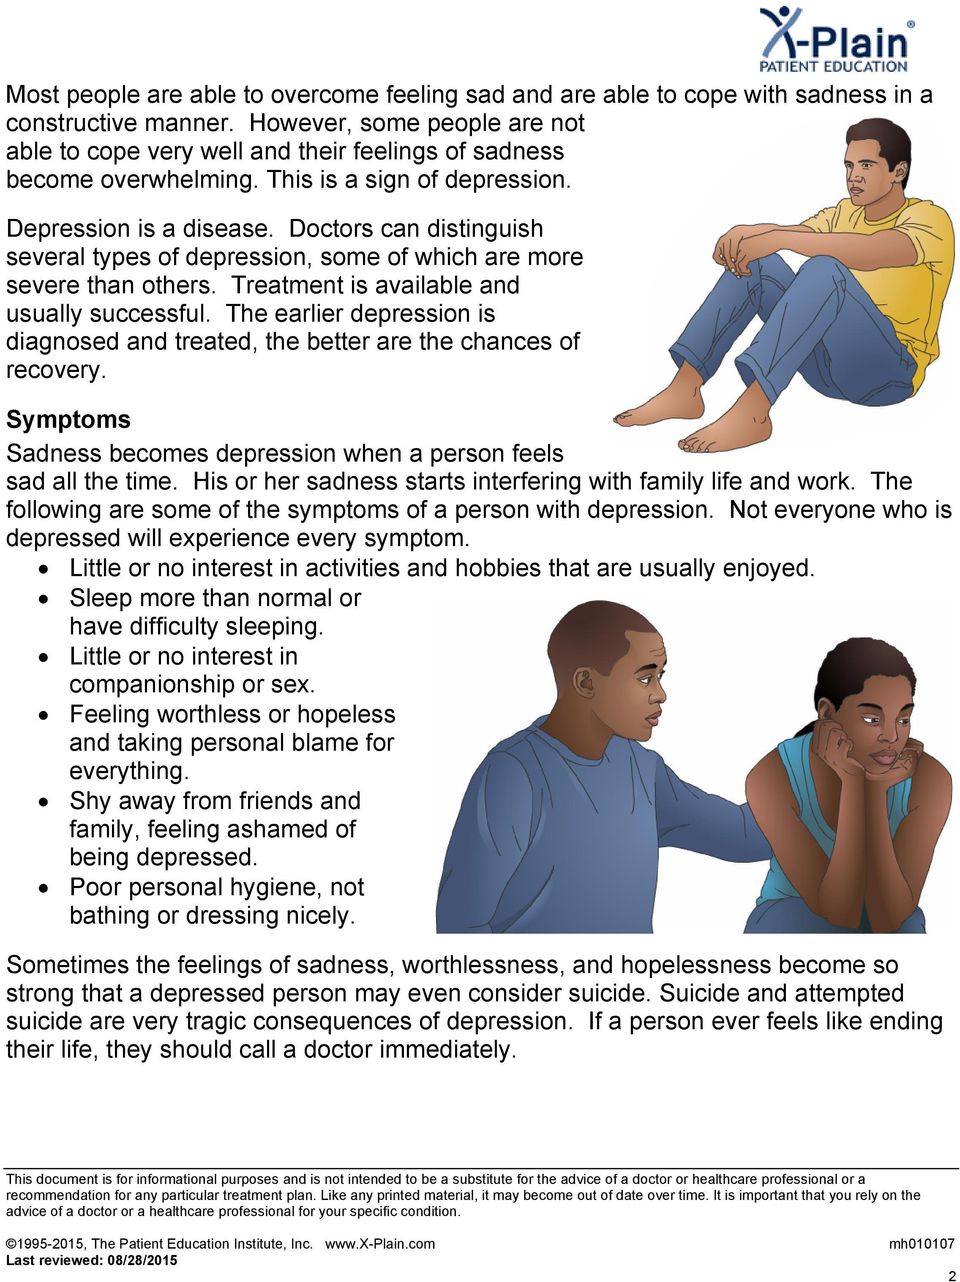 Doctors can distinguish several types of depression, some of which are more severe than others. Treatment is available and usually successful.